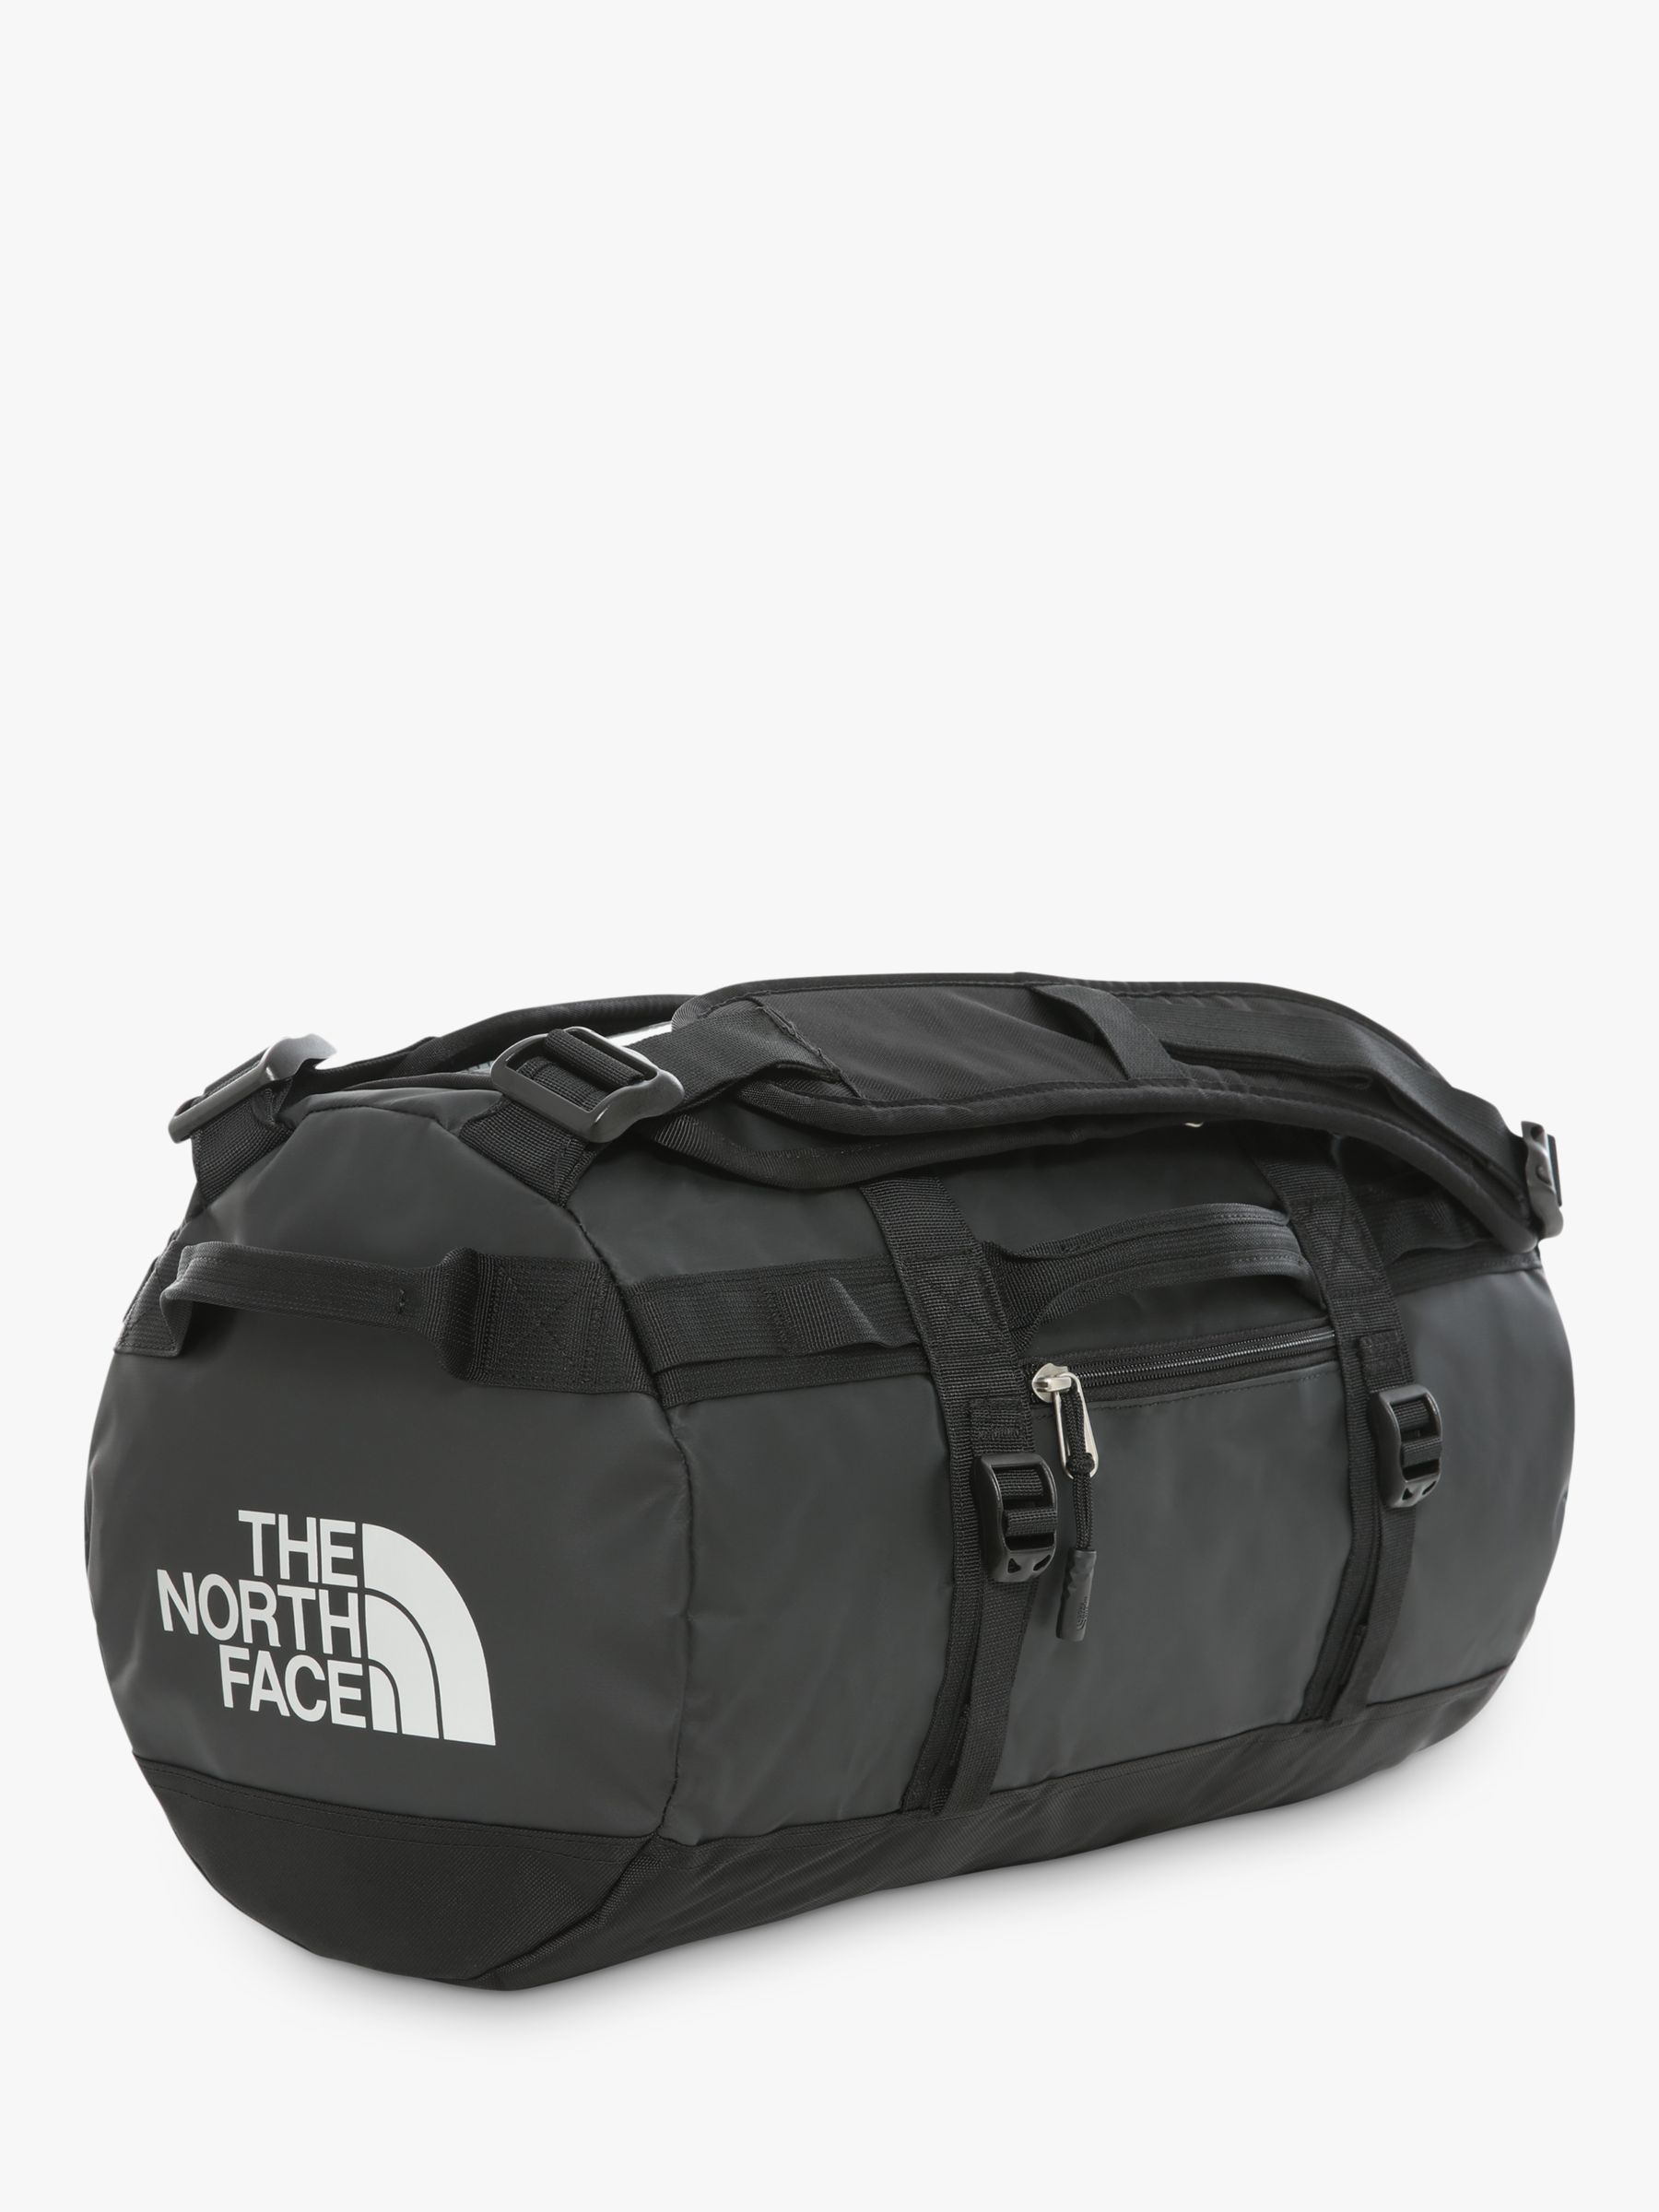 north face duffel bag hand luggage